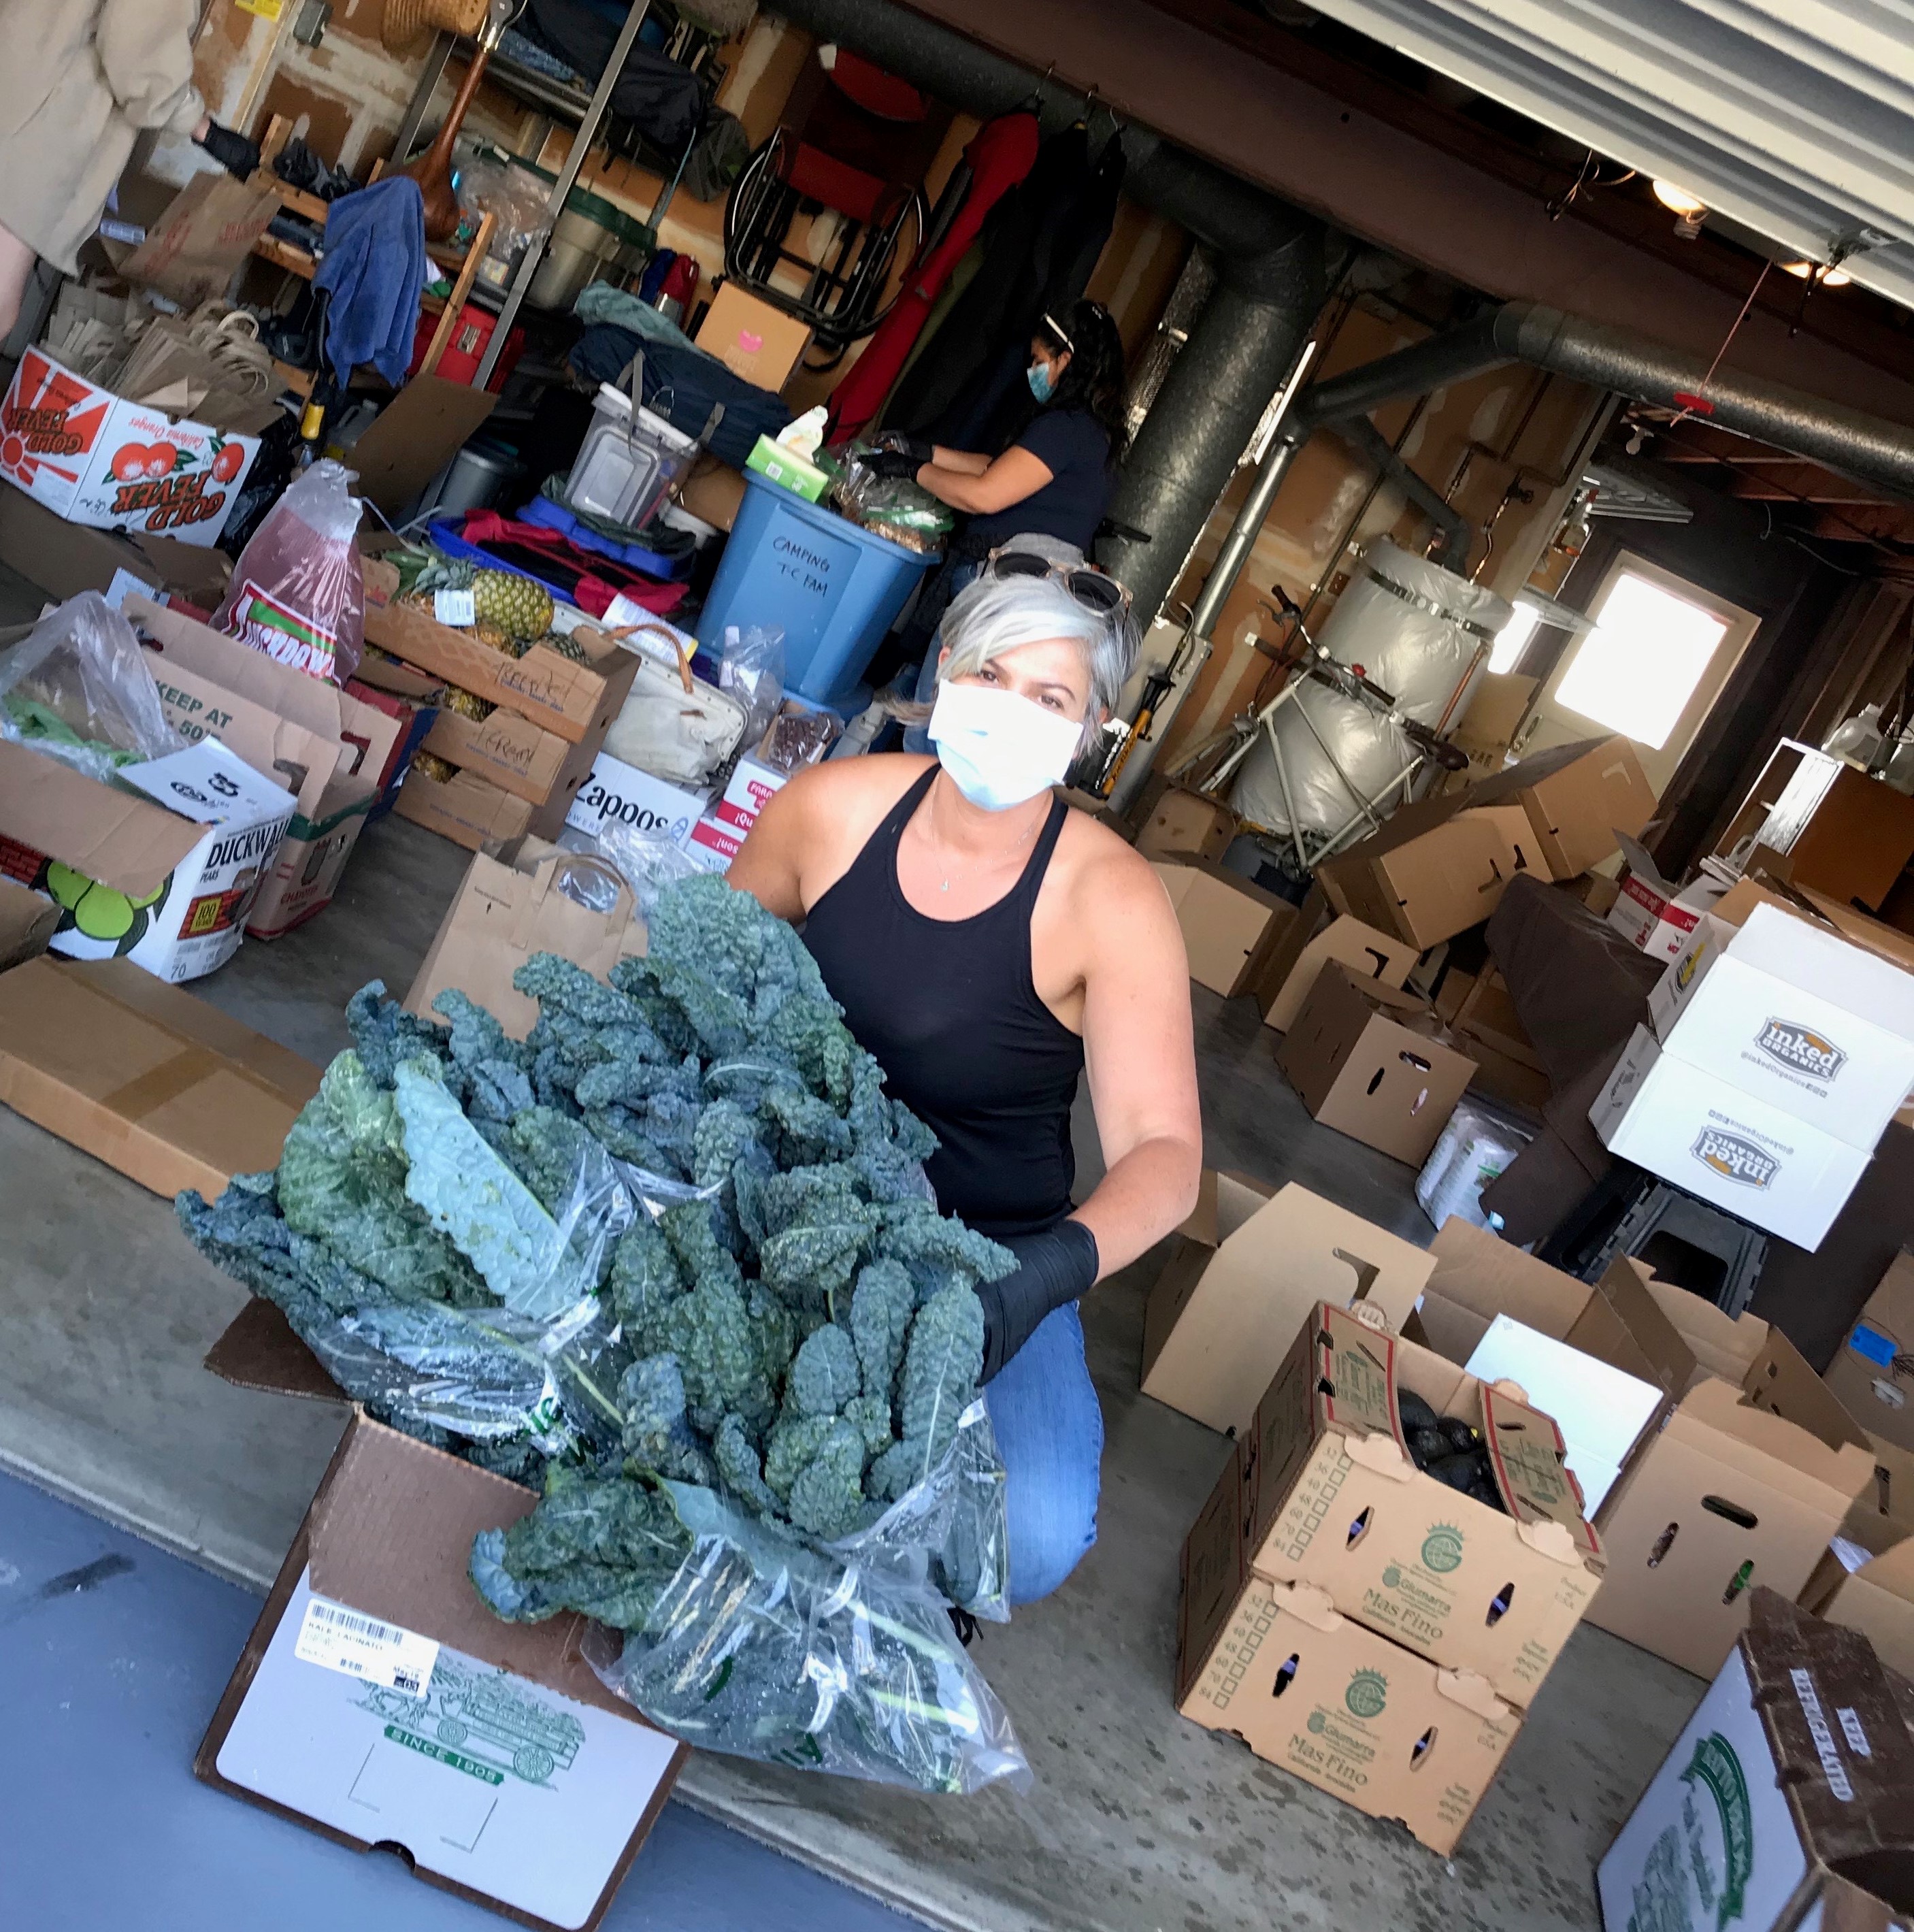 Janna is seen in the center of the frame, facing the camera with a mask on. She is squatting behind a box that contains kale, a green leafy vegetable to hand out to patients.